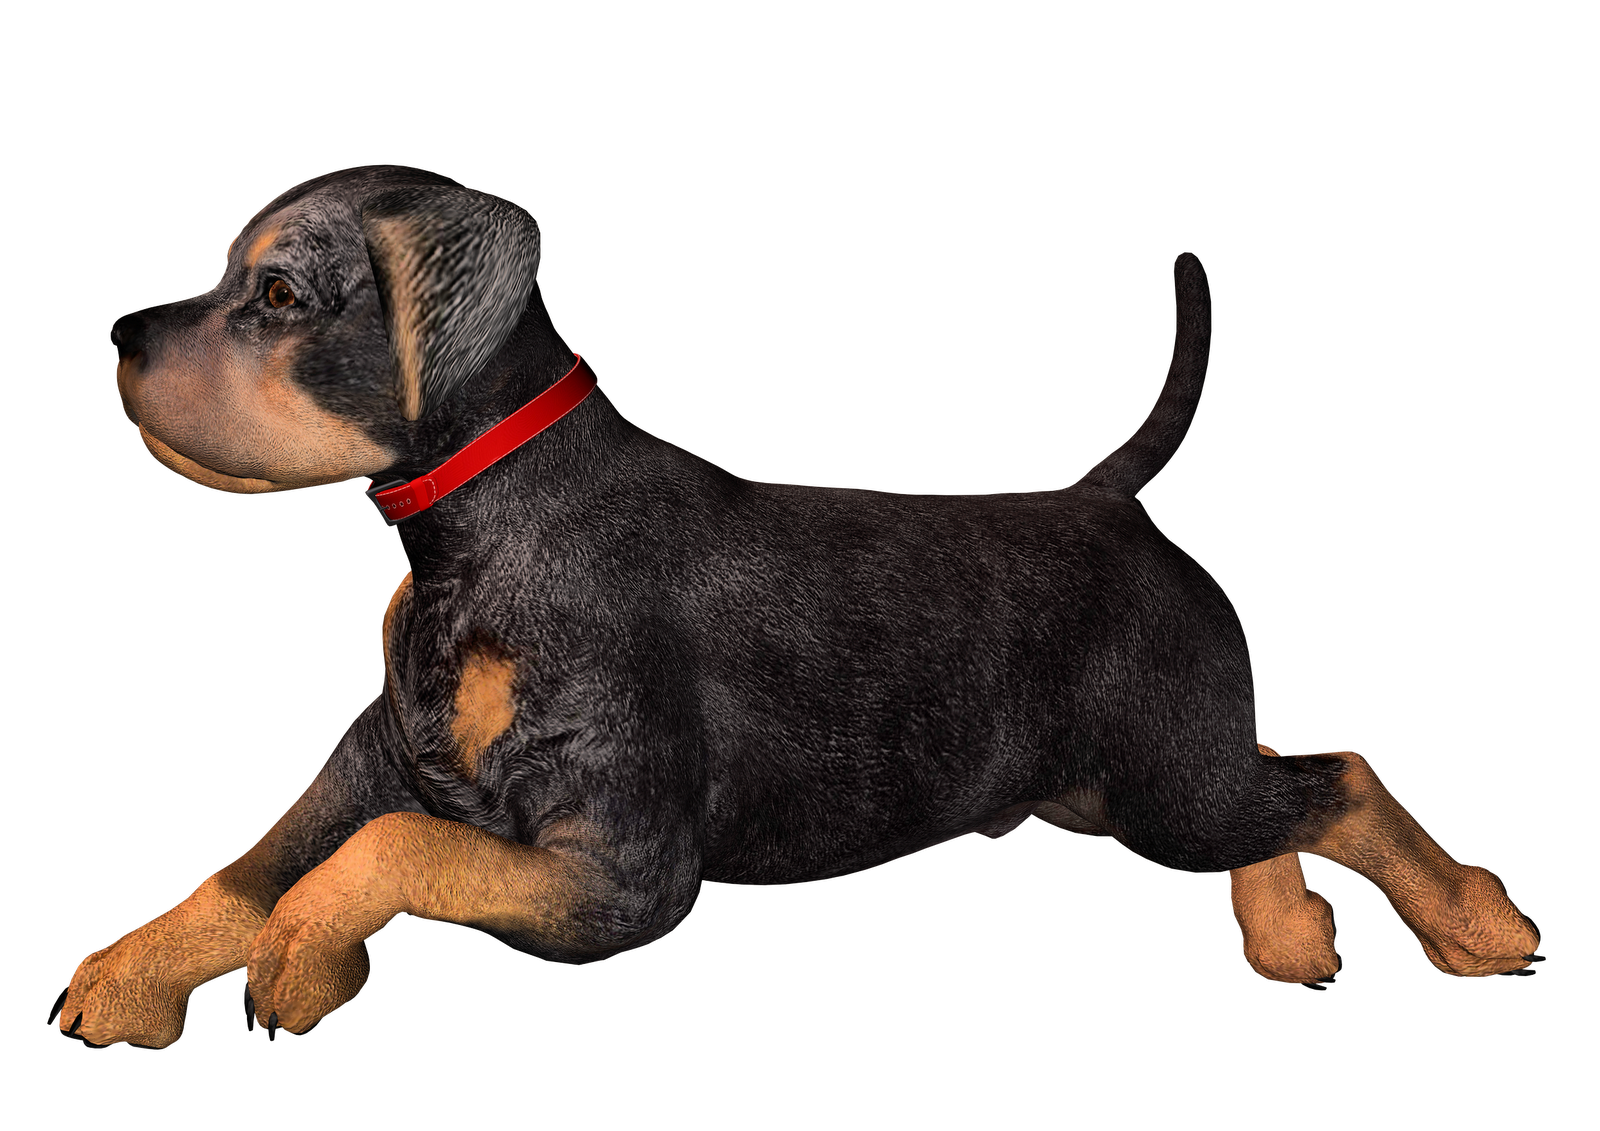 Free High Resolution graphics and clip art: dog png graphics